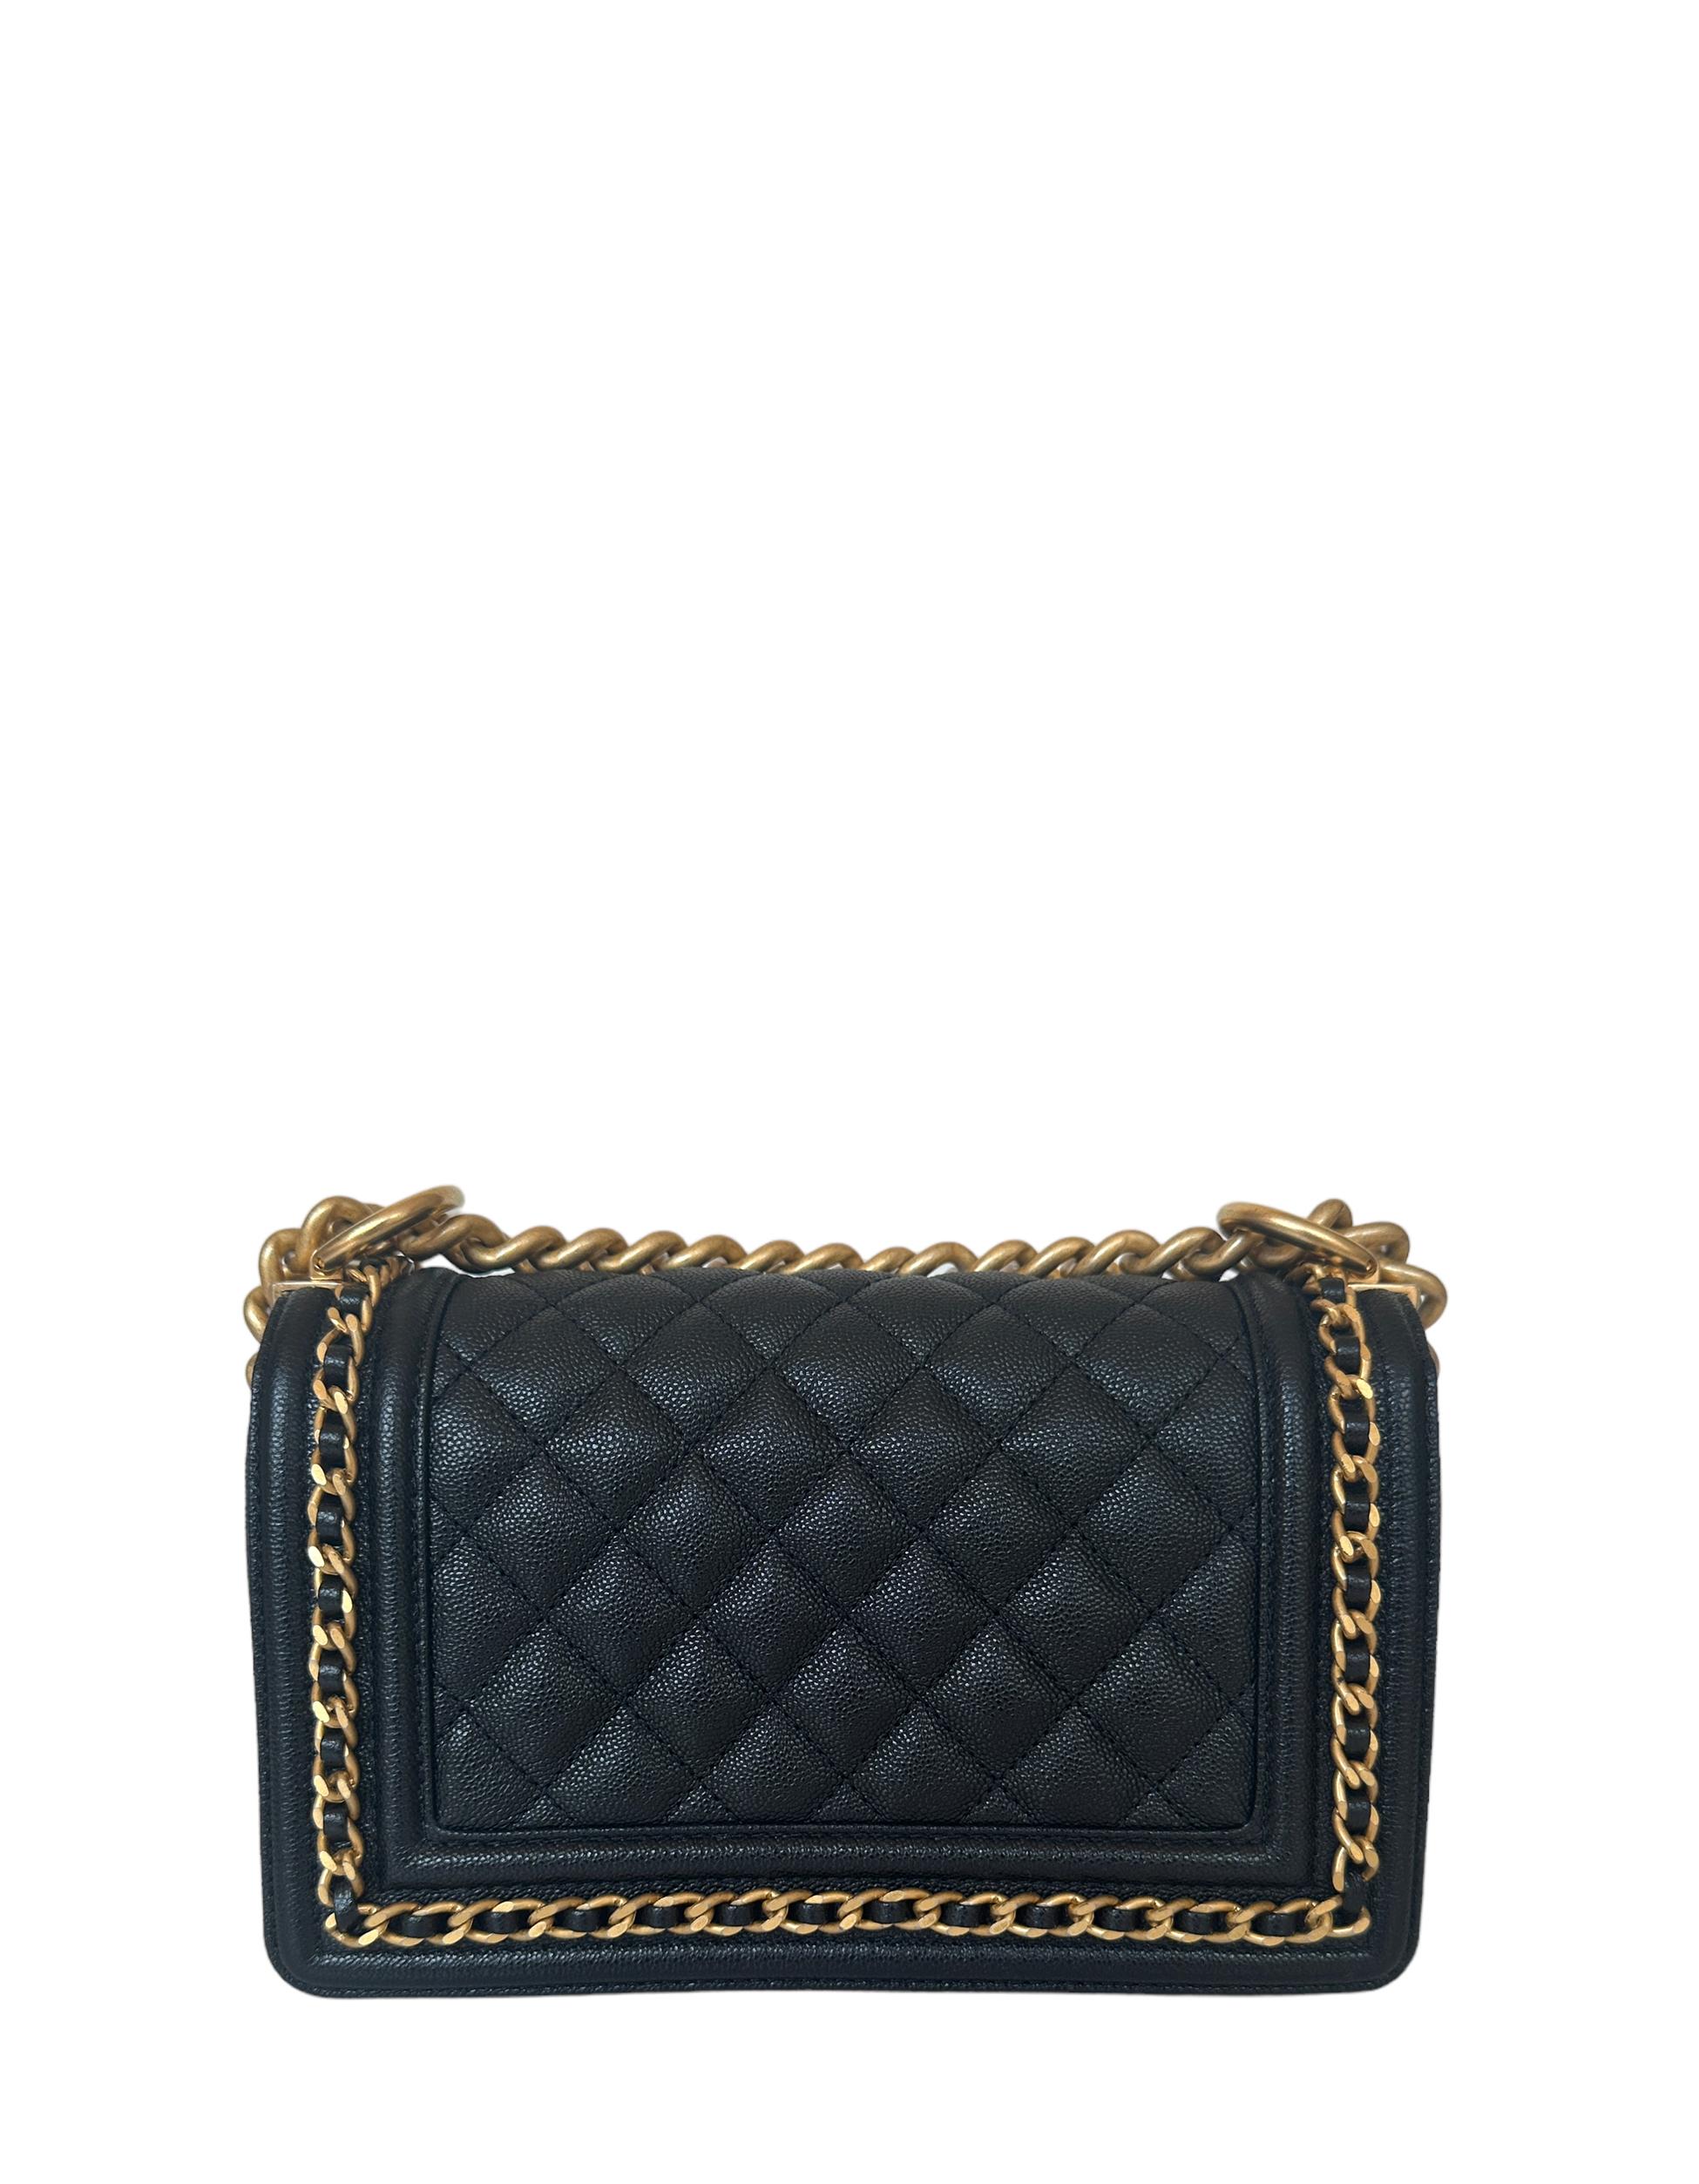 Chanel Black Caviar Leather Small Quilted Chain Around Boy Bag    
Made In: Italy
Color: Black and gold
Hardware: Goldtone
Materials: Caviar leather
Lining: Black leather
Closure/Opening: Flap top with pushlock
Exterior Pockets: None
Interior